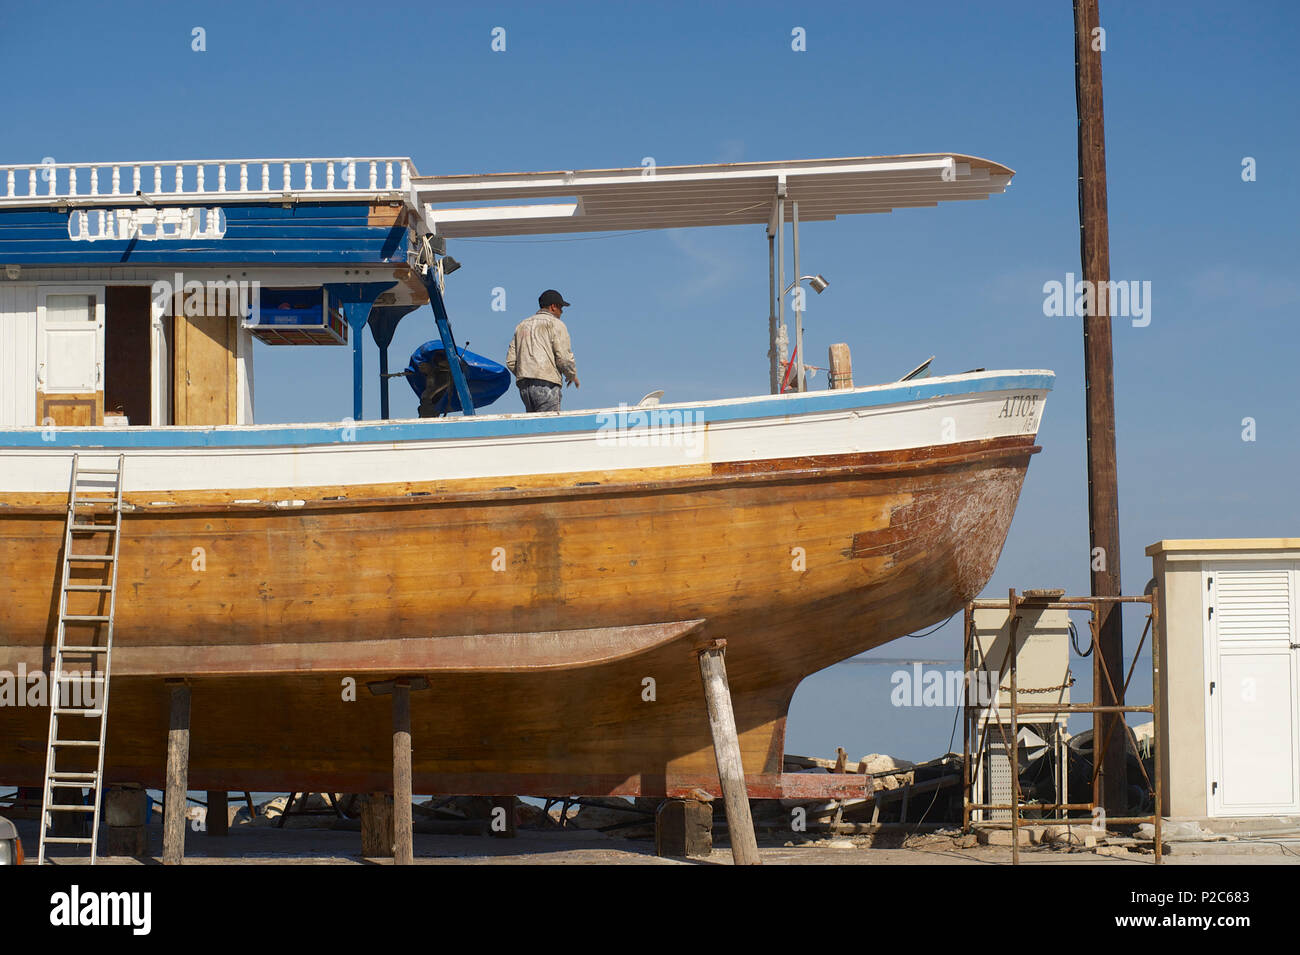 Boat in the dock in the habour, Latchi, Paphos distict, Cyprus Stock Photo